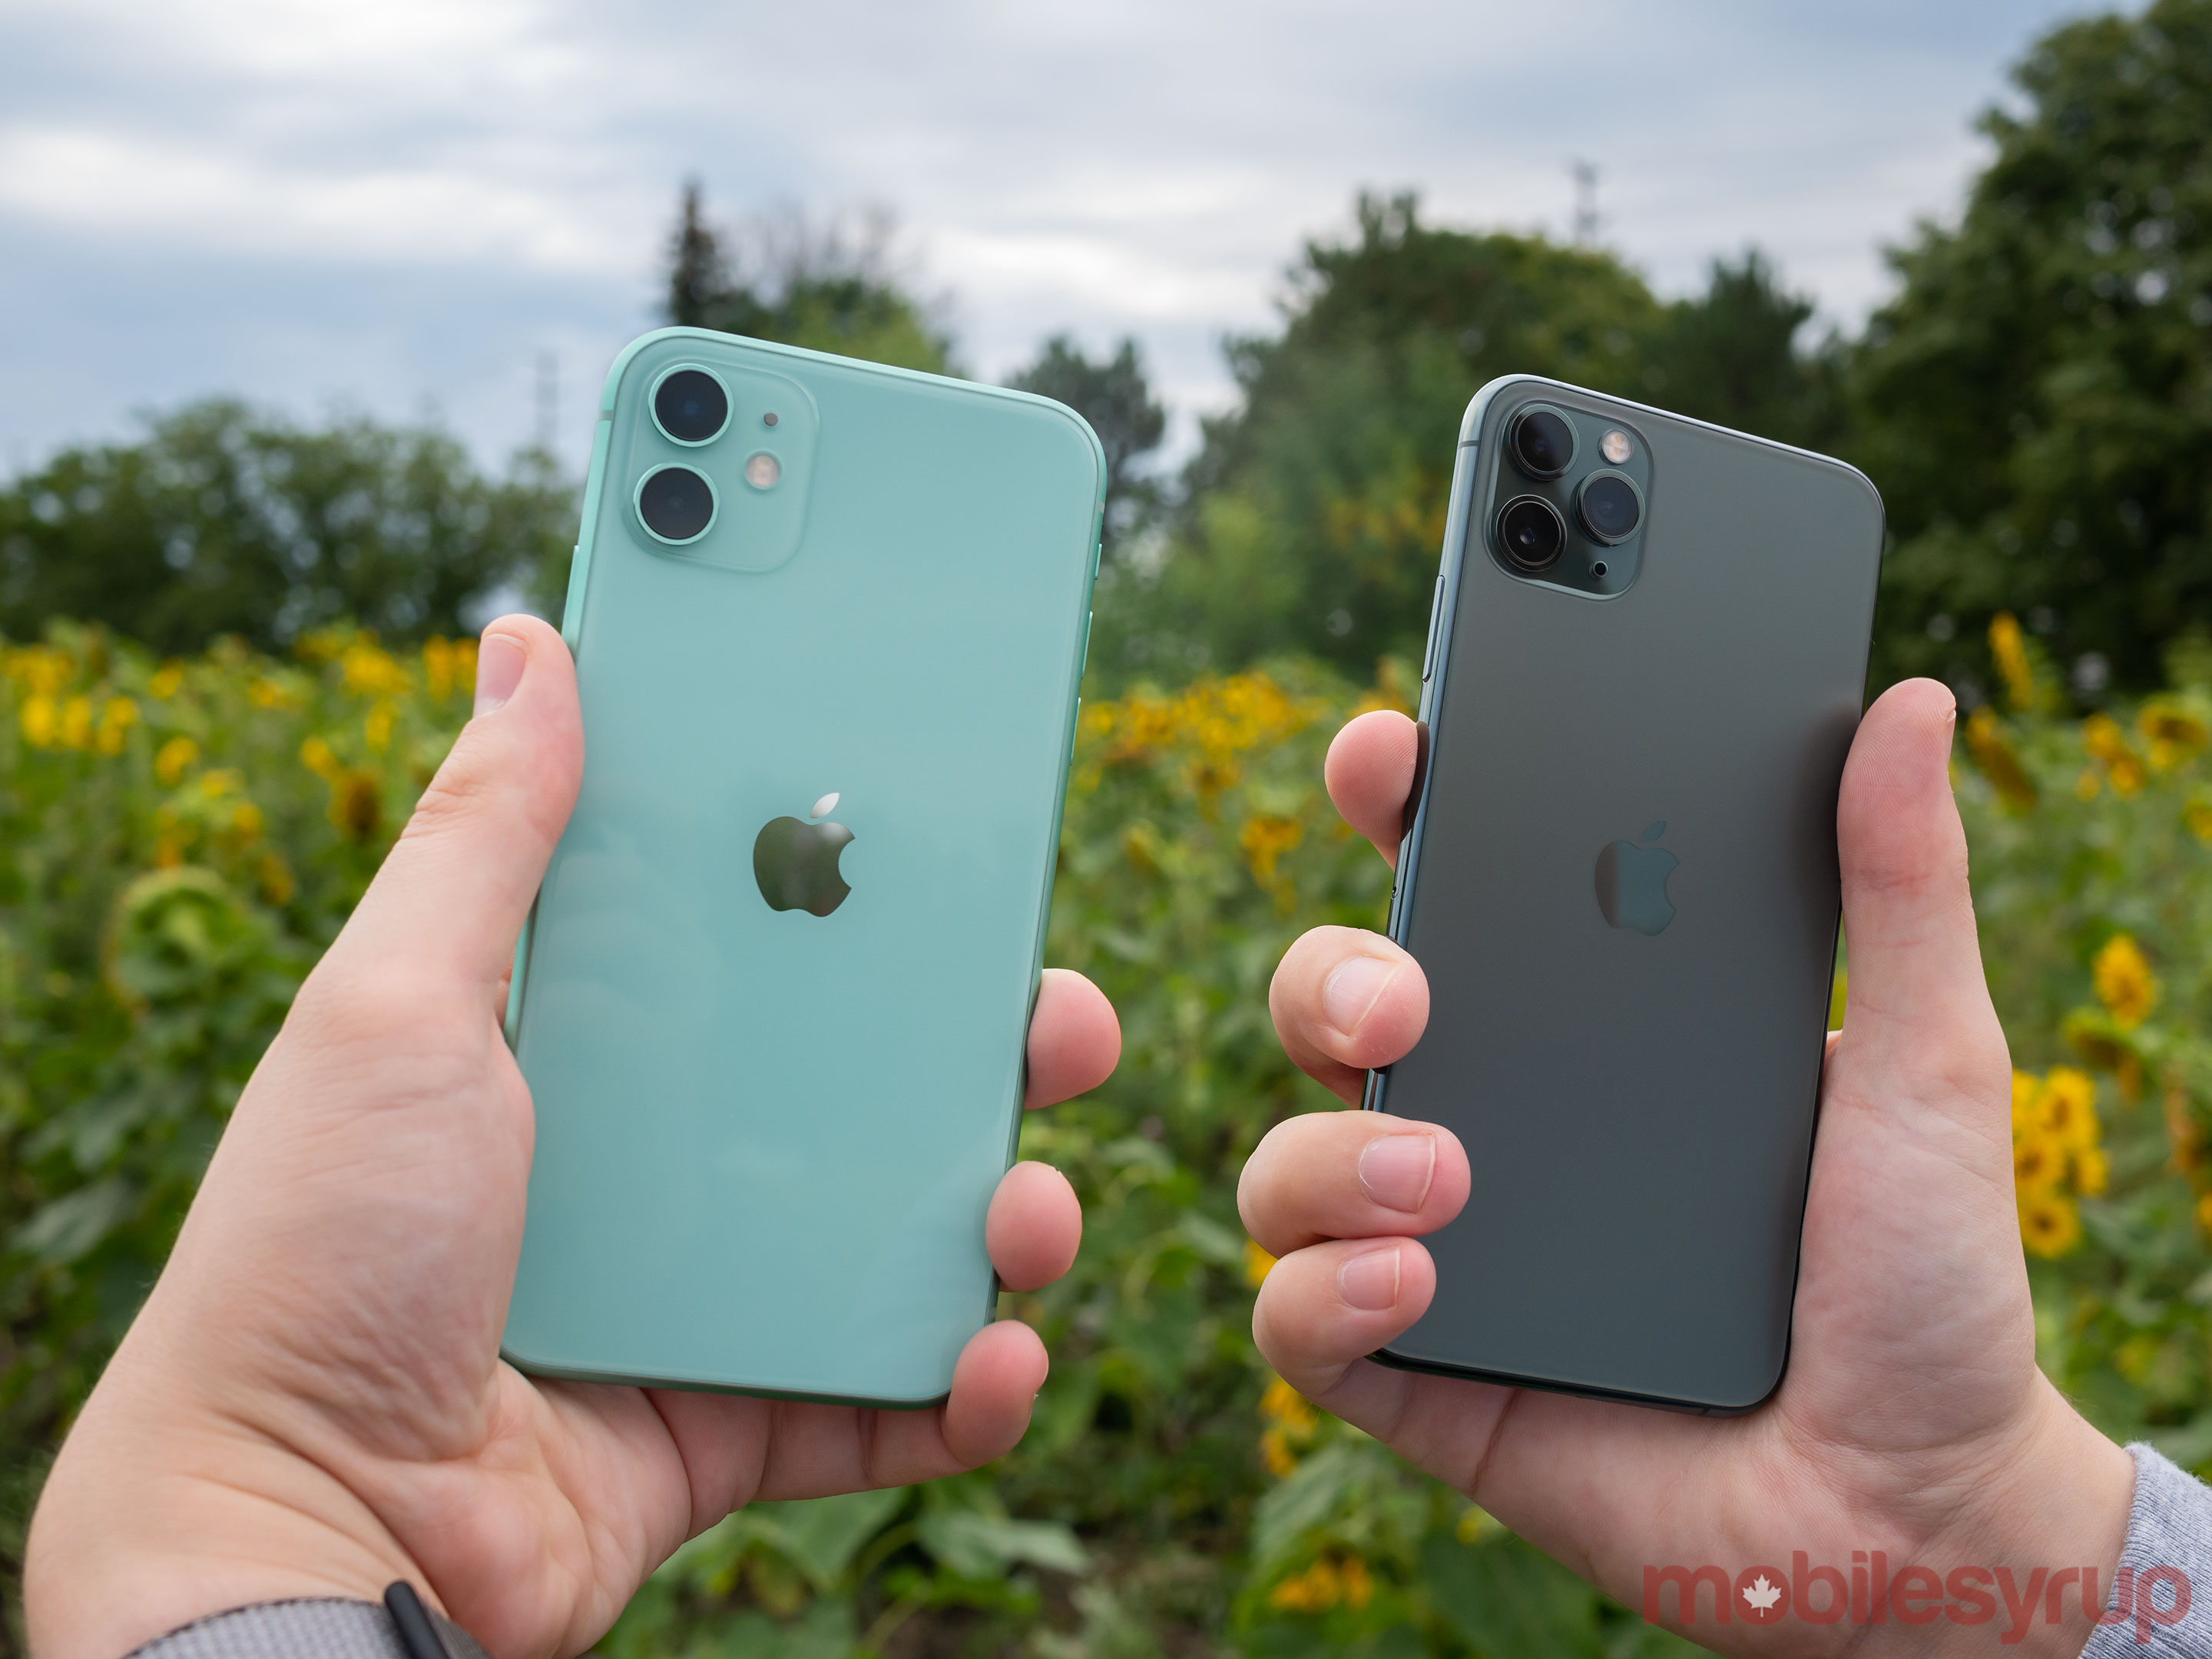 iPhone 11 Pro and 11 Pro Max Review: Reclaiming the camera crown